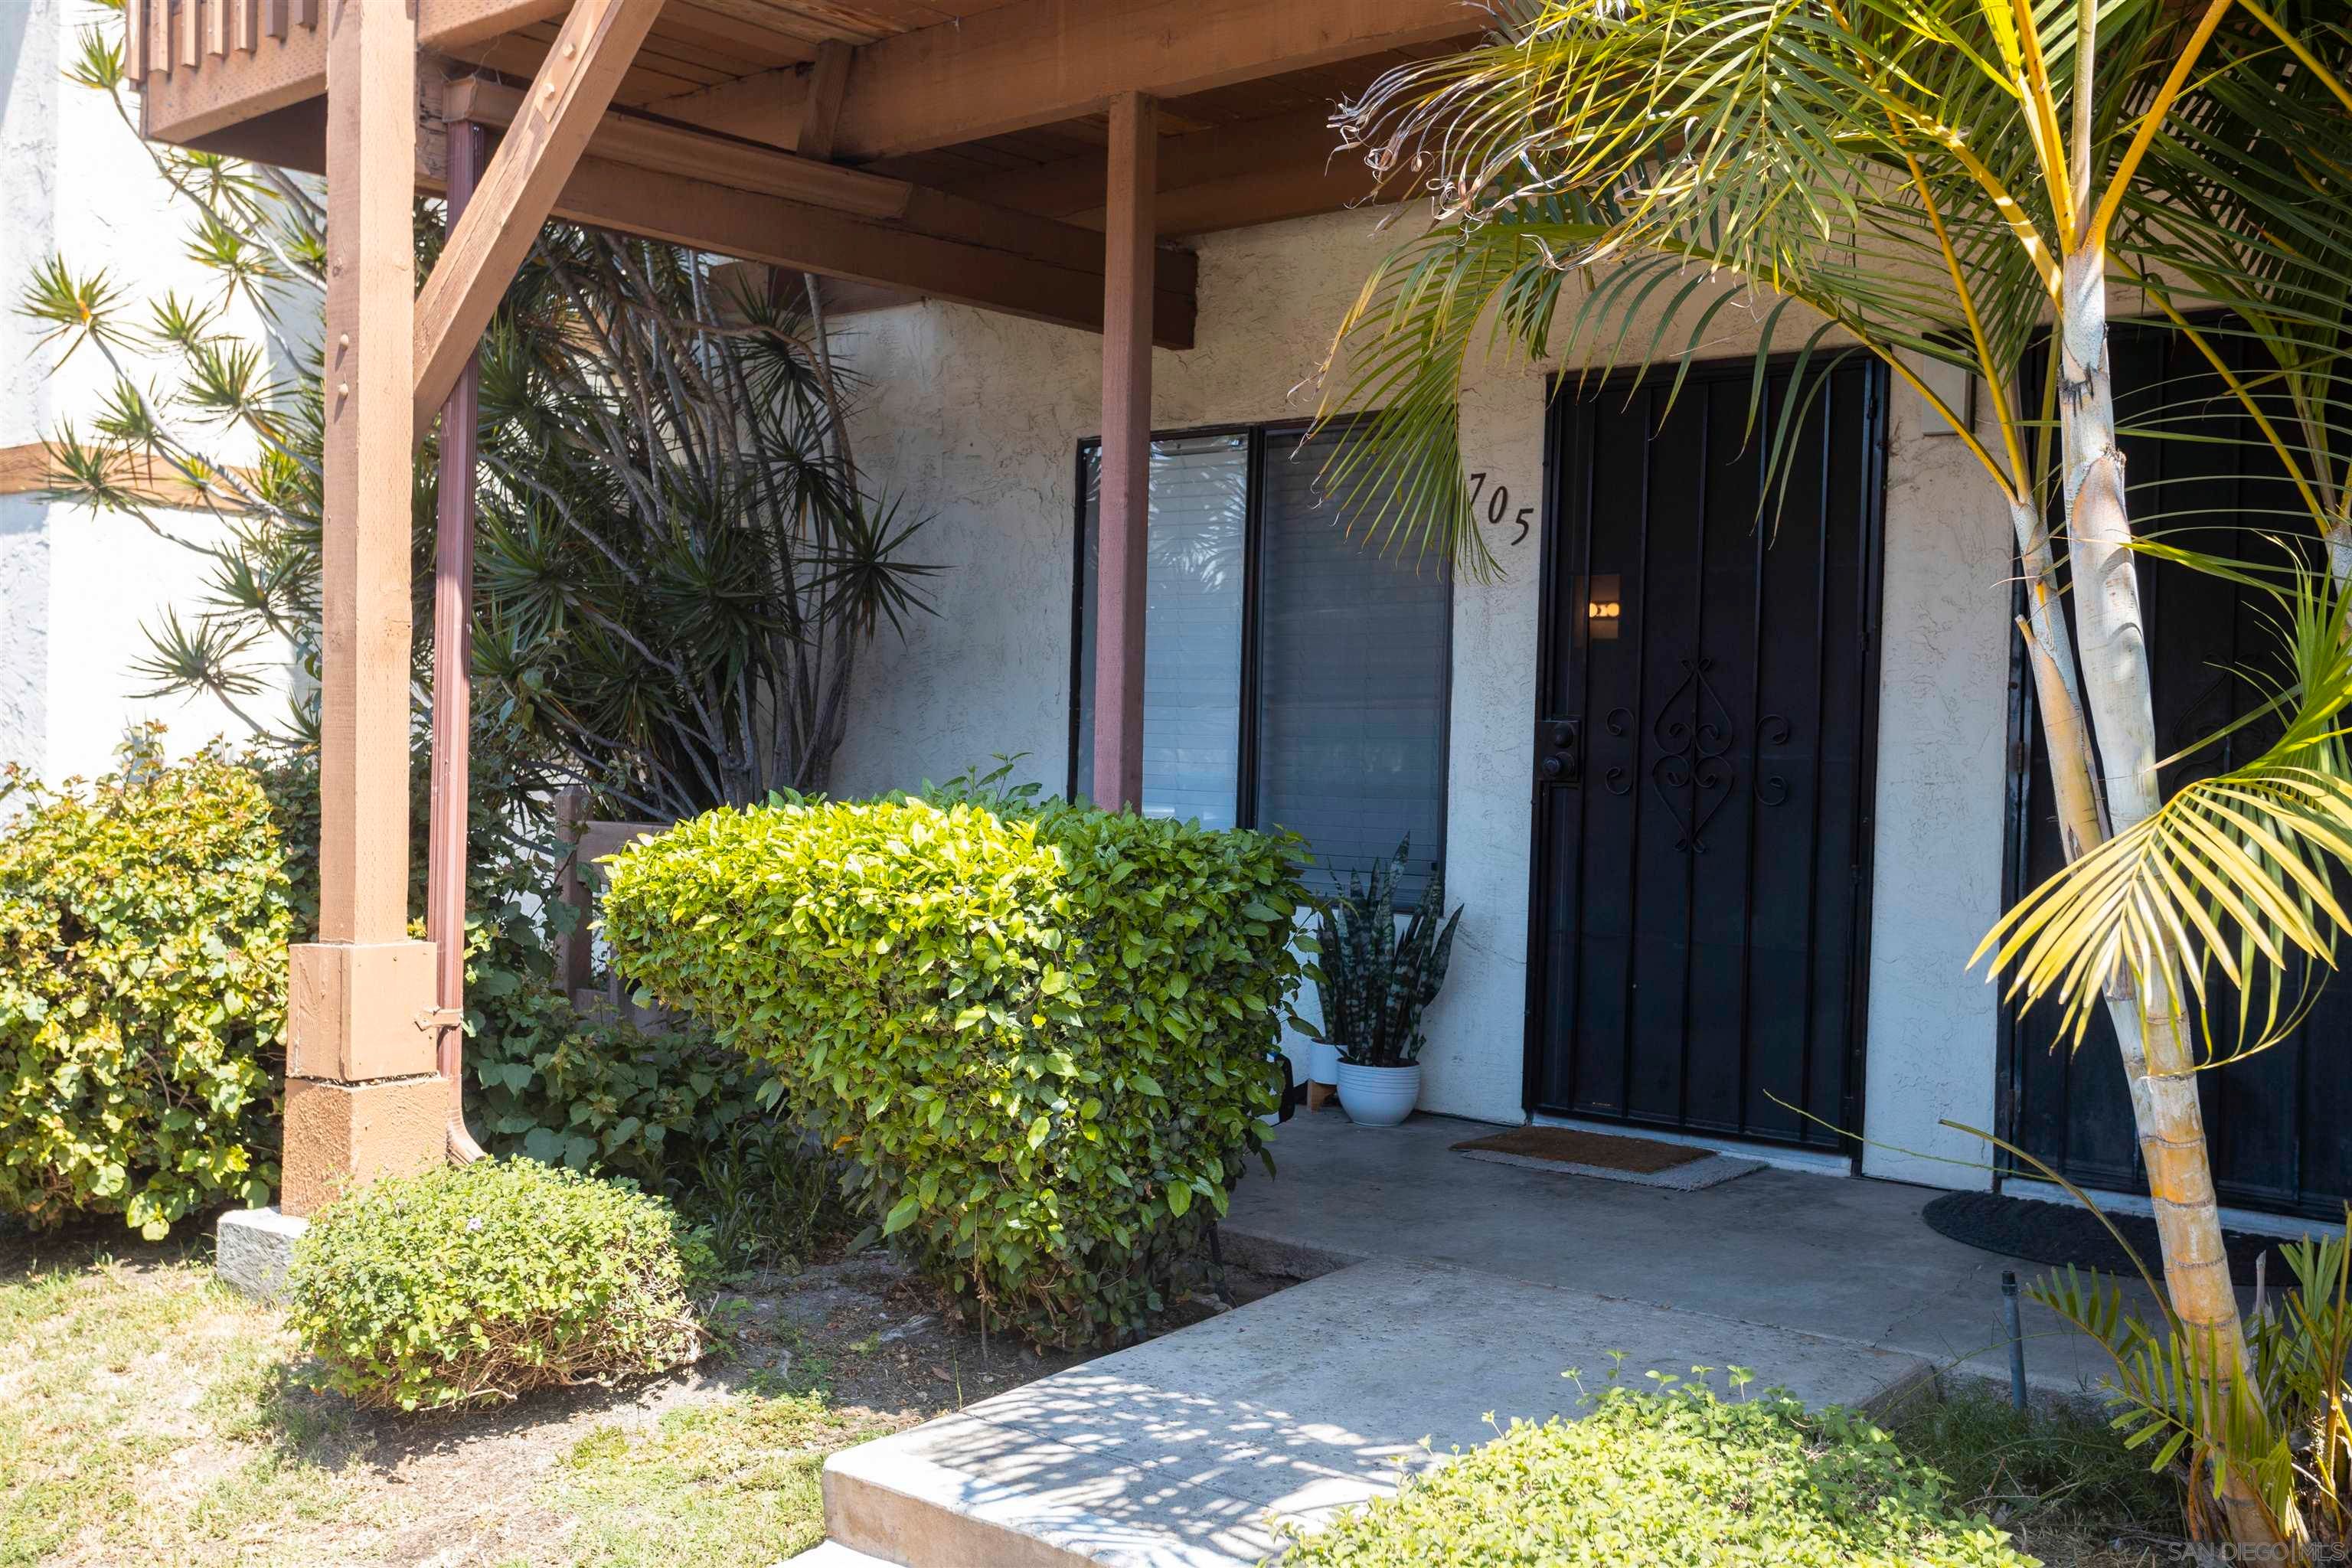 I have sold a property at 705 6362 Rancho Mission Rd in San Diego
